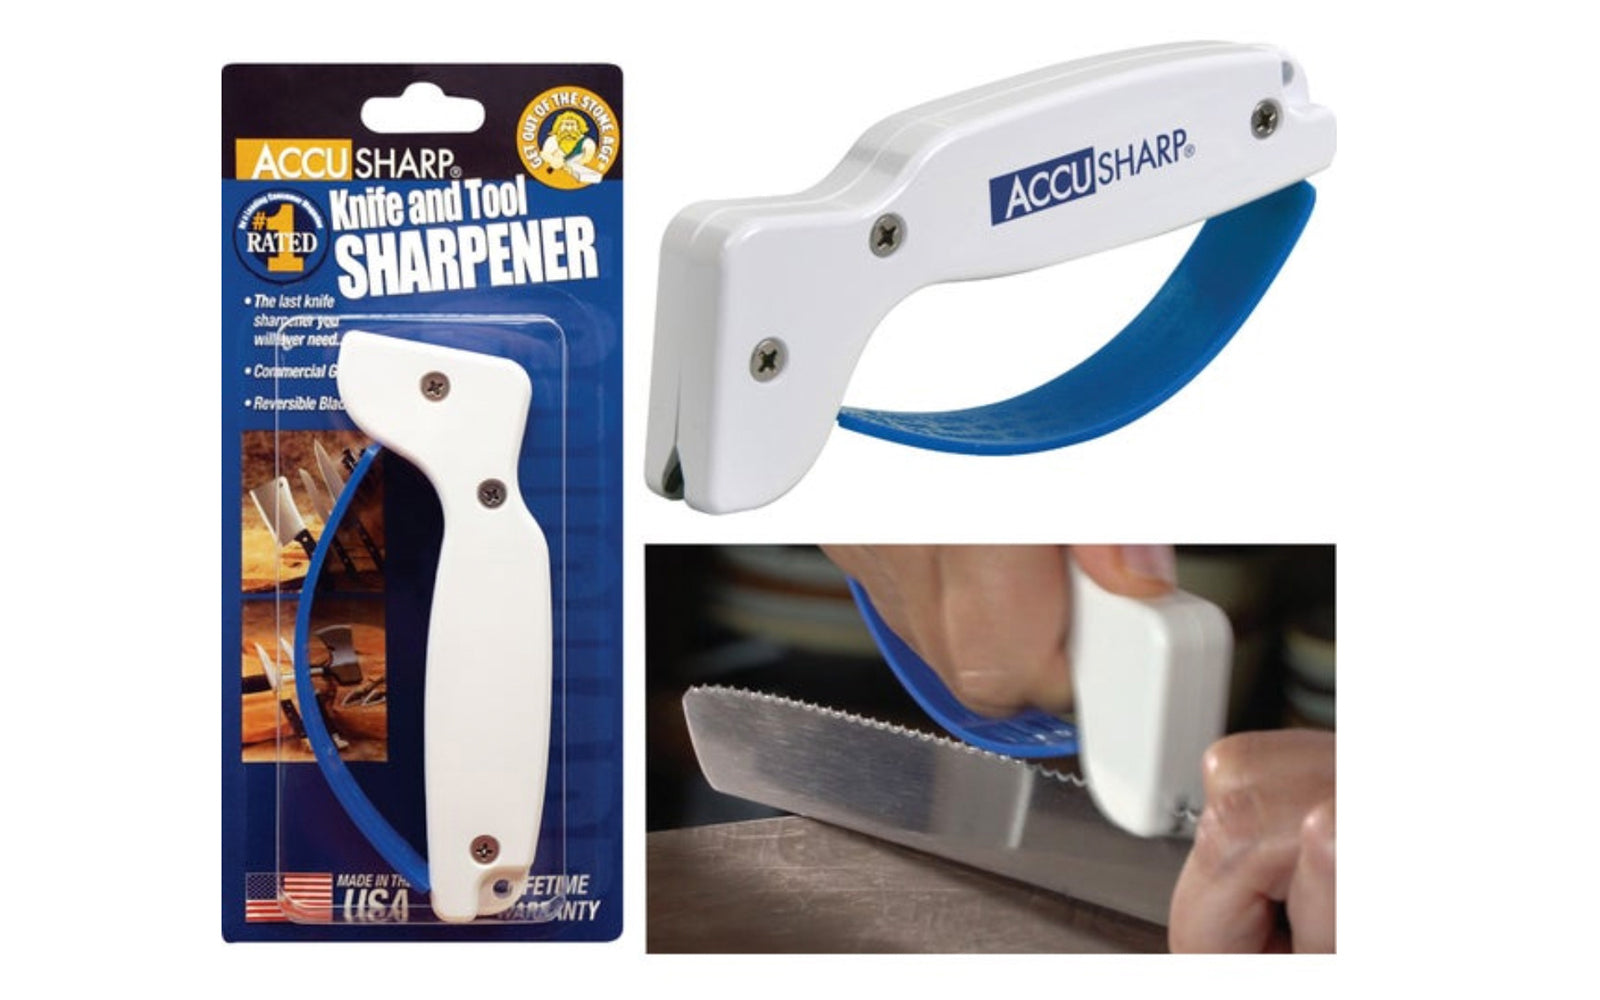 What sharpener can I use on hunting knives?